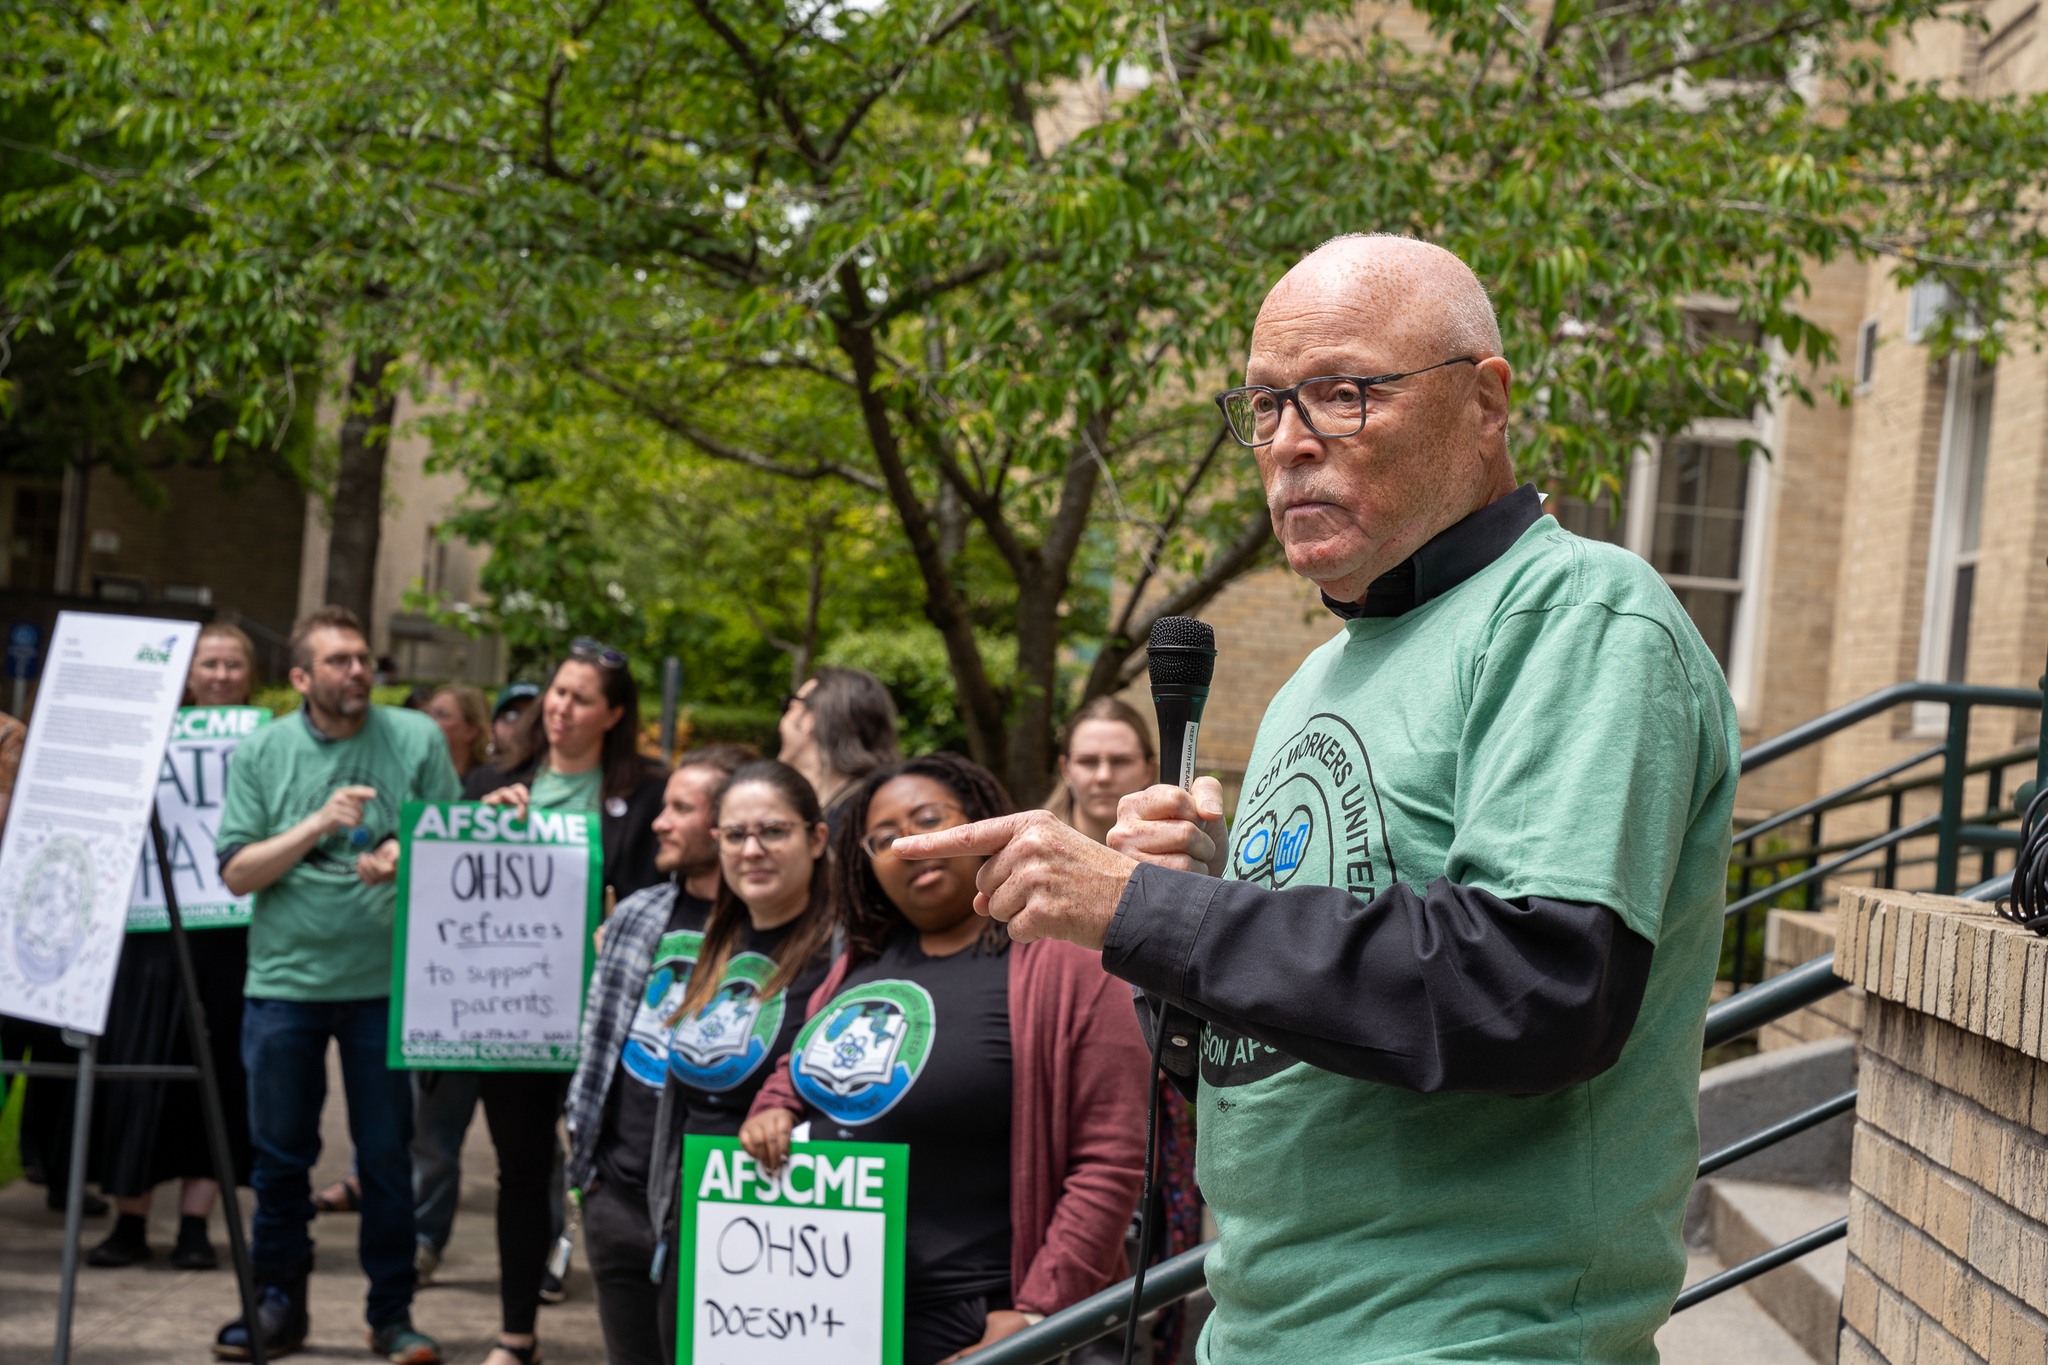 AFSCME president joins OHSU workers in contract fight, celebrates organizing win